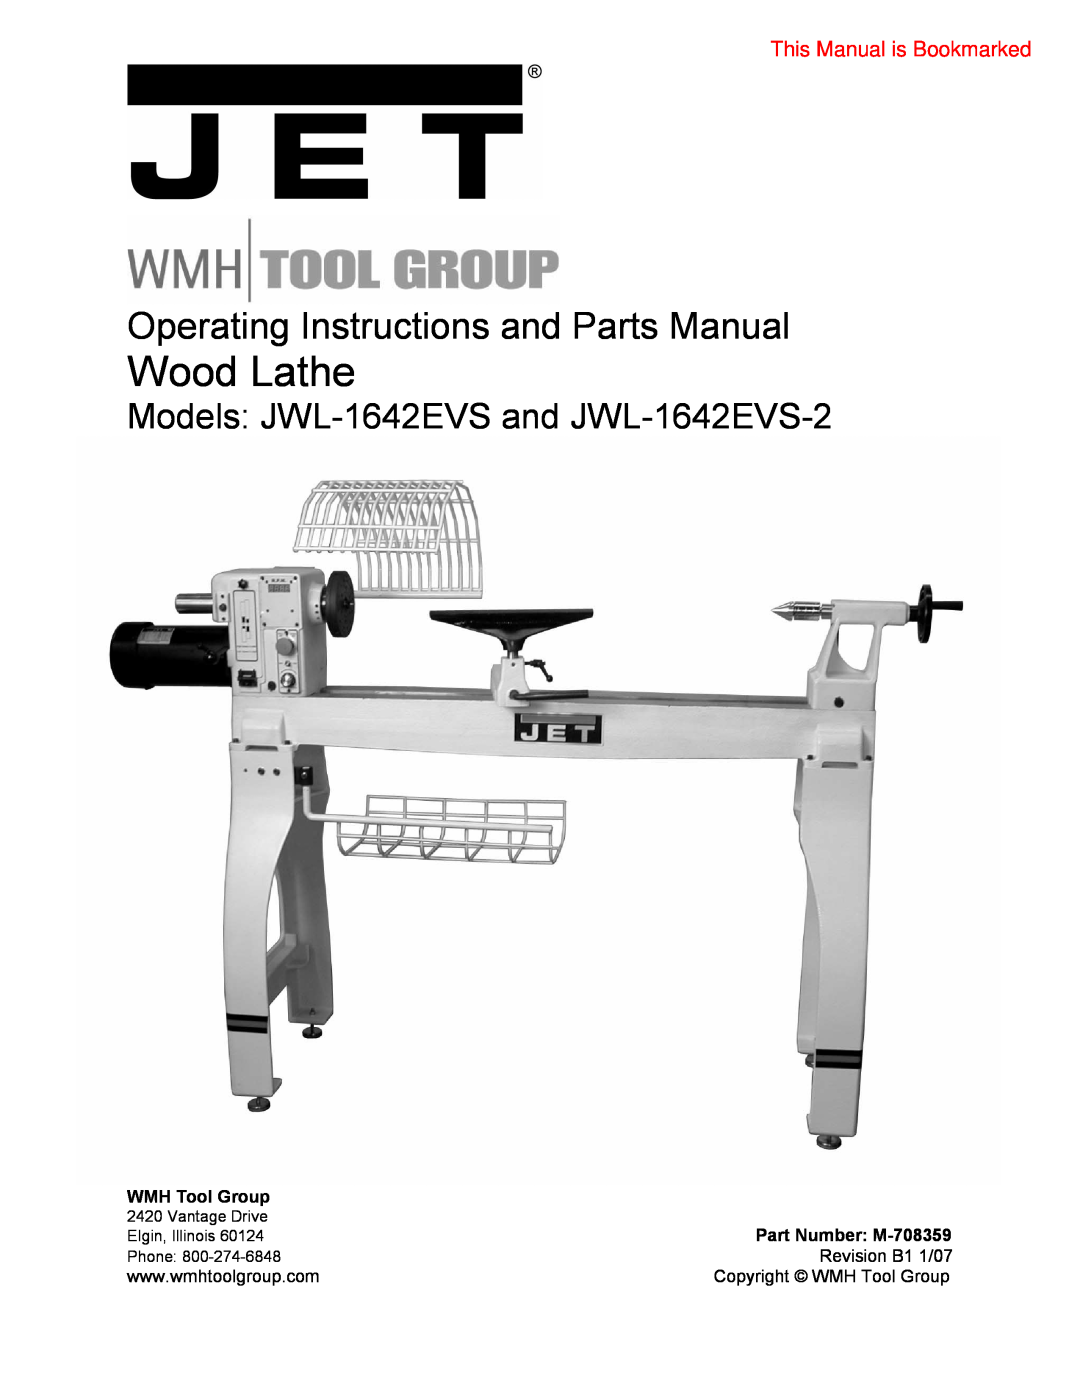 Jet Tools JWL-1642EVS-2 operating instructions WMH Tool Group, Part Number M-708359, Wood Lathe, This Manual is Bookmarked 